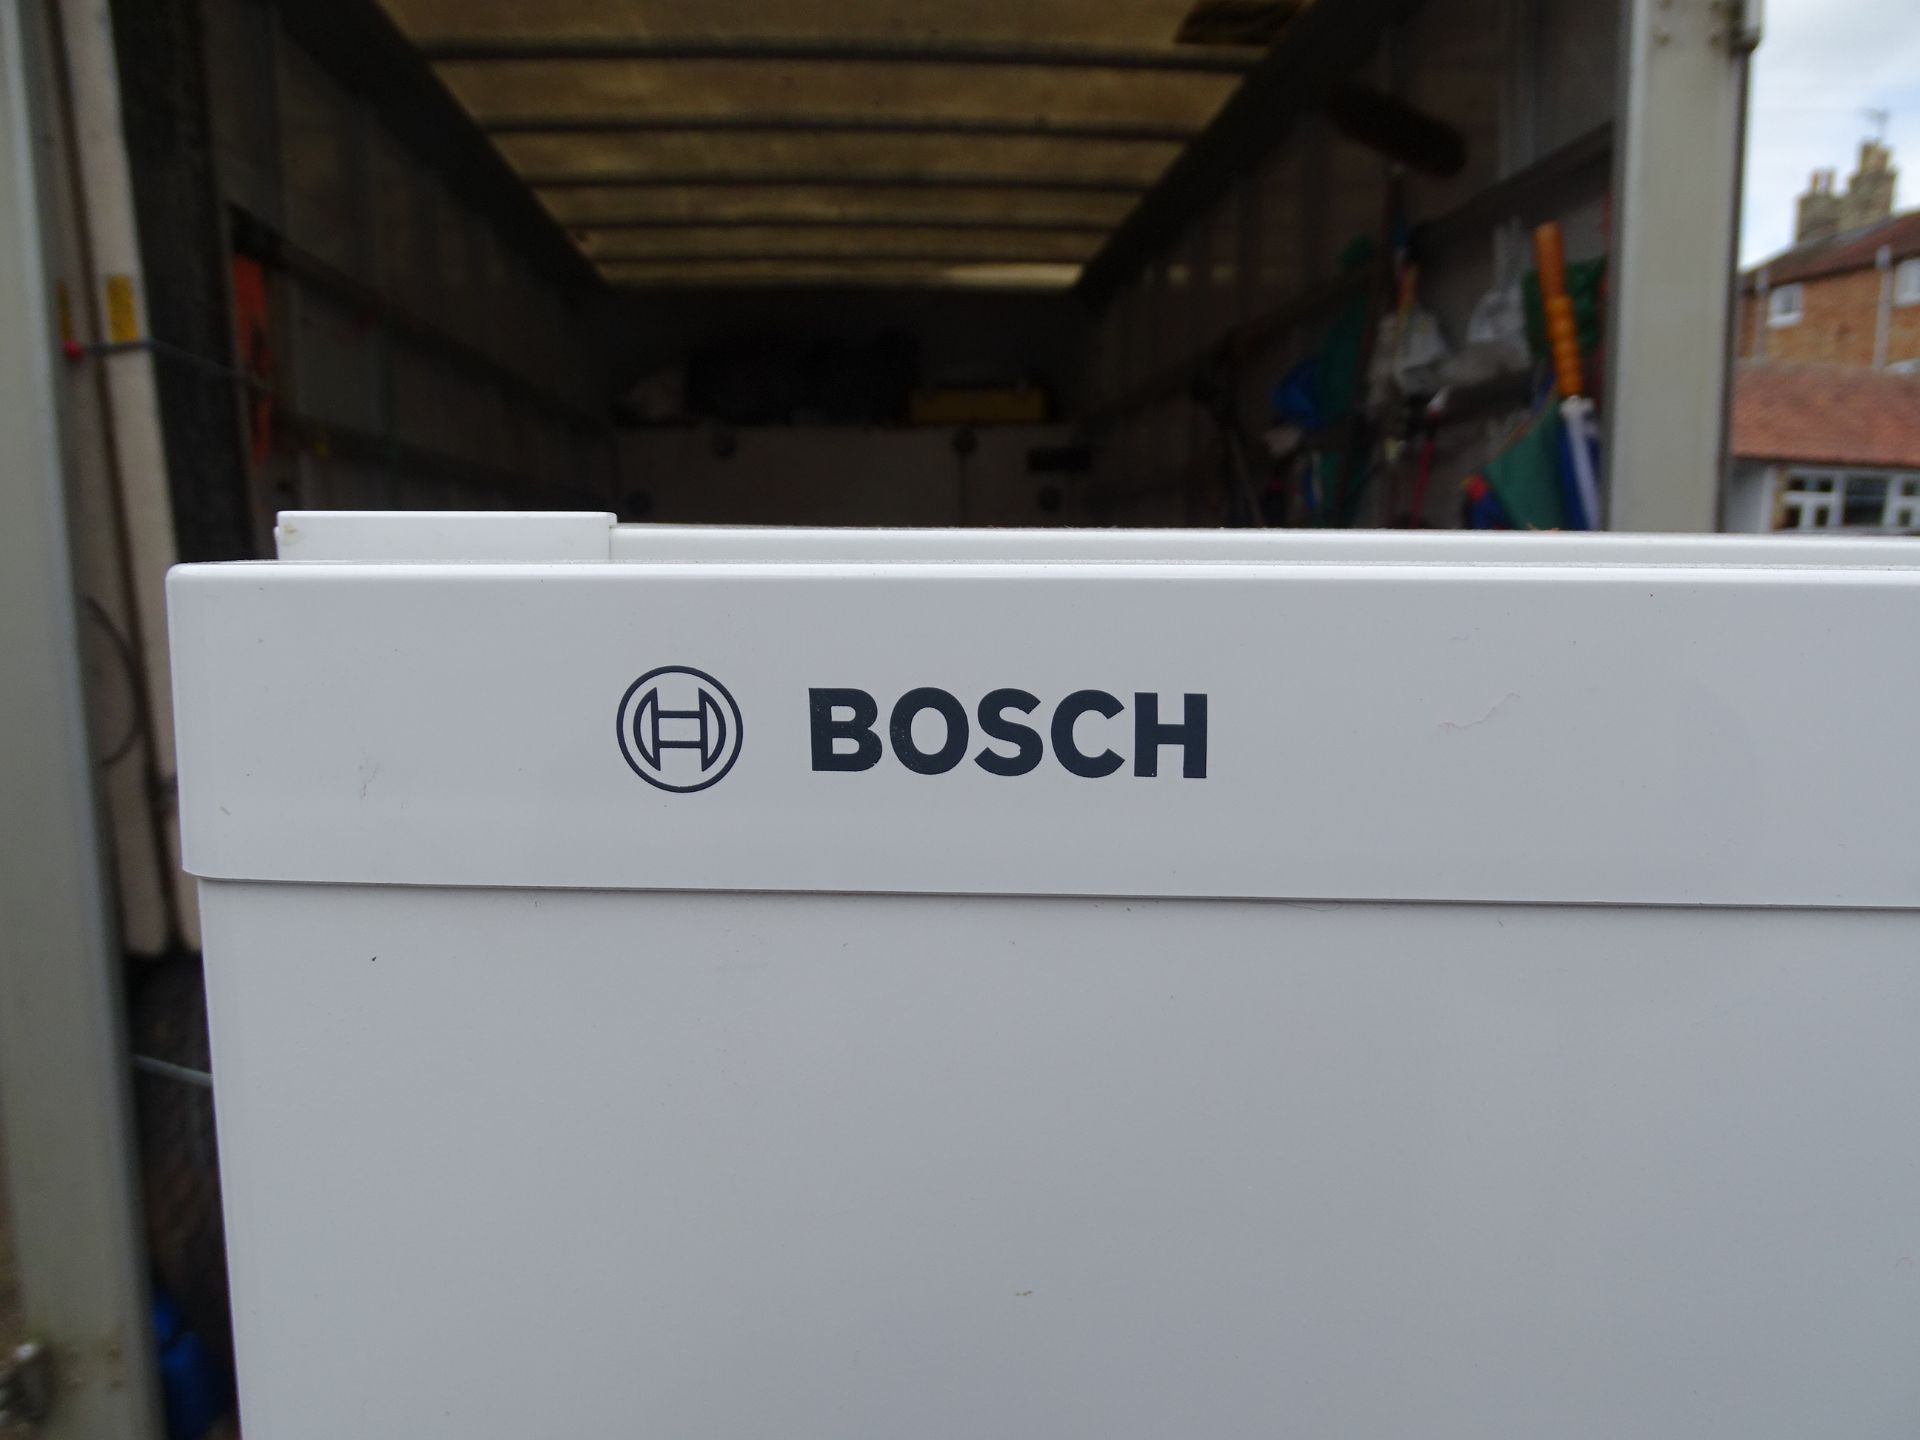 Bosch fridge freezer from a house clearance - Image 2 of 3